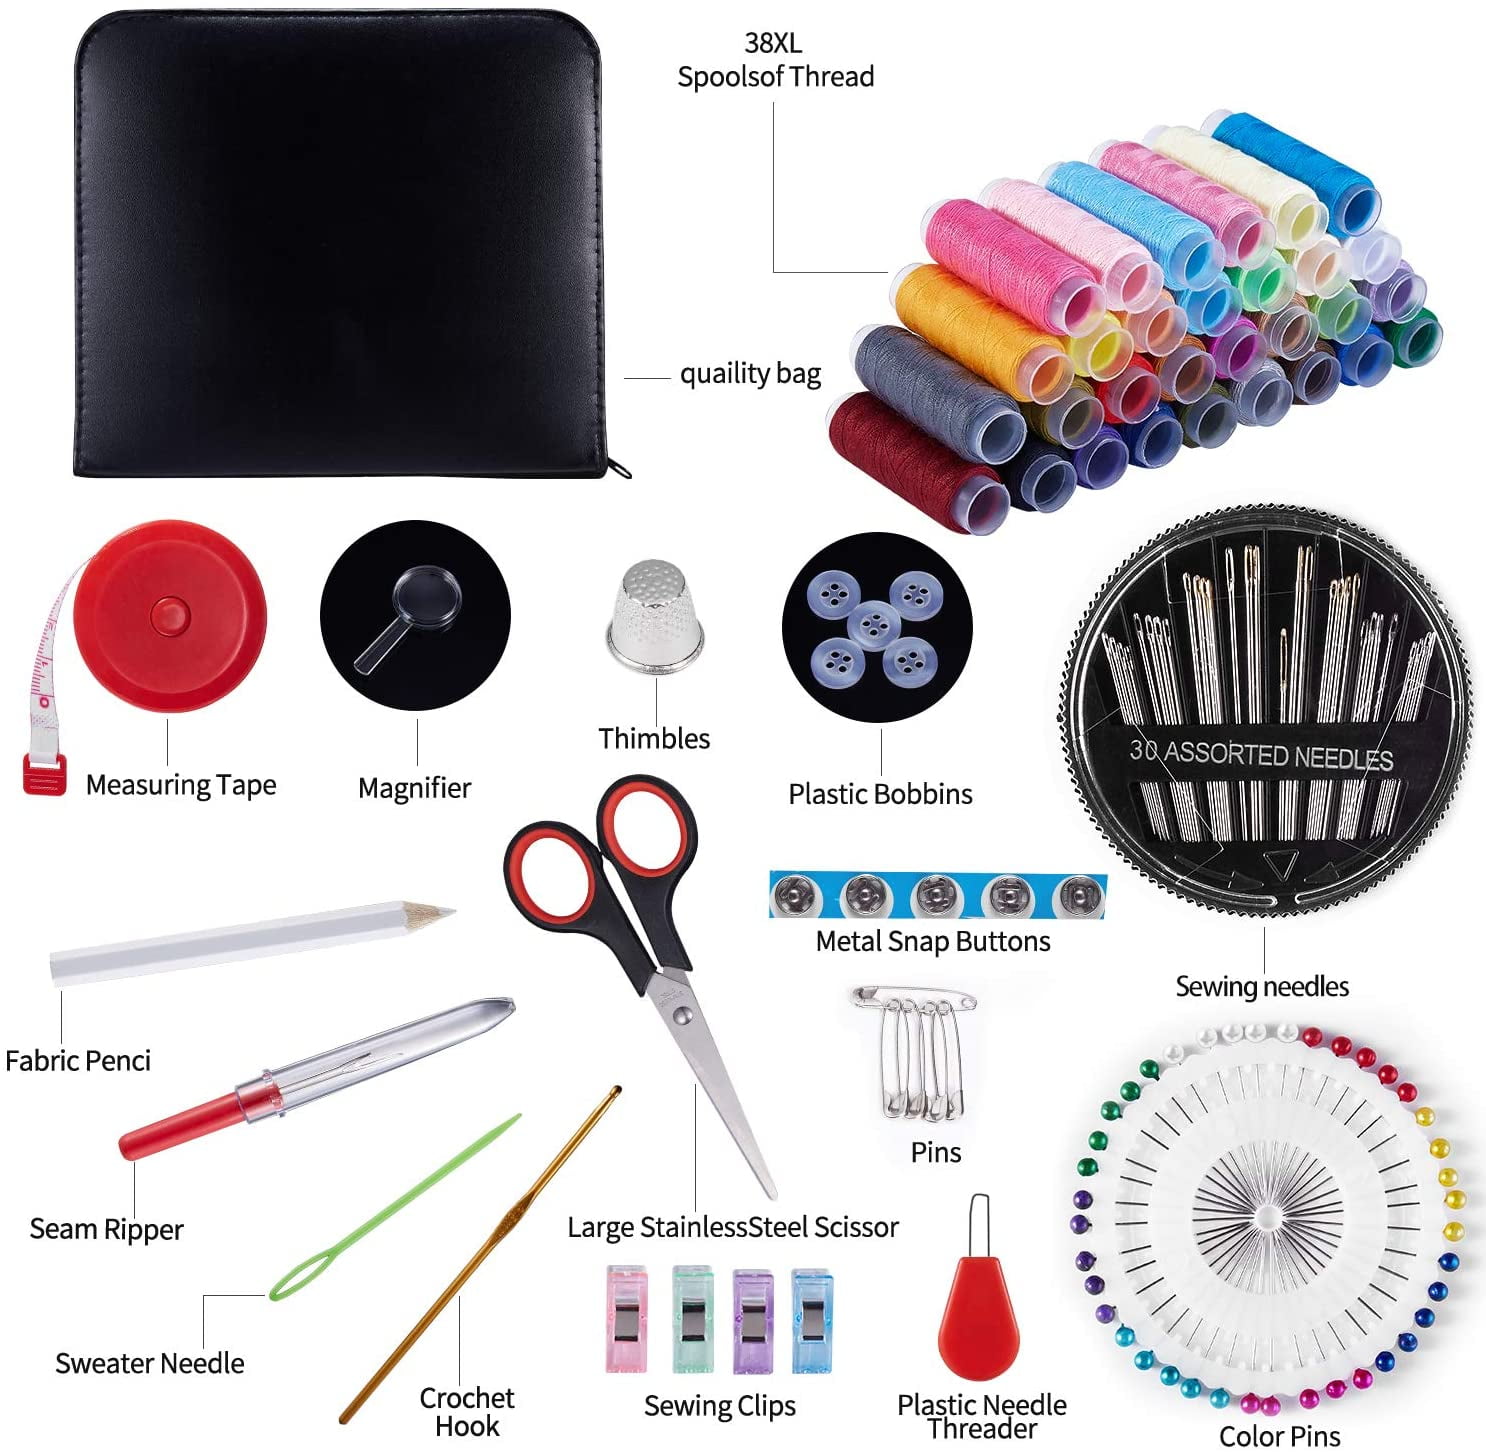  104 Pcs Premium Sewing Kit, Portable Needle and Thread Kit for  Beginners, Travelers and Adults, DIY Sewing Supplies with 18 Color Threads,  24 Needles, Seam Ripper, Scissors, Thimble etc